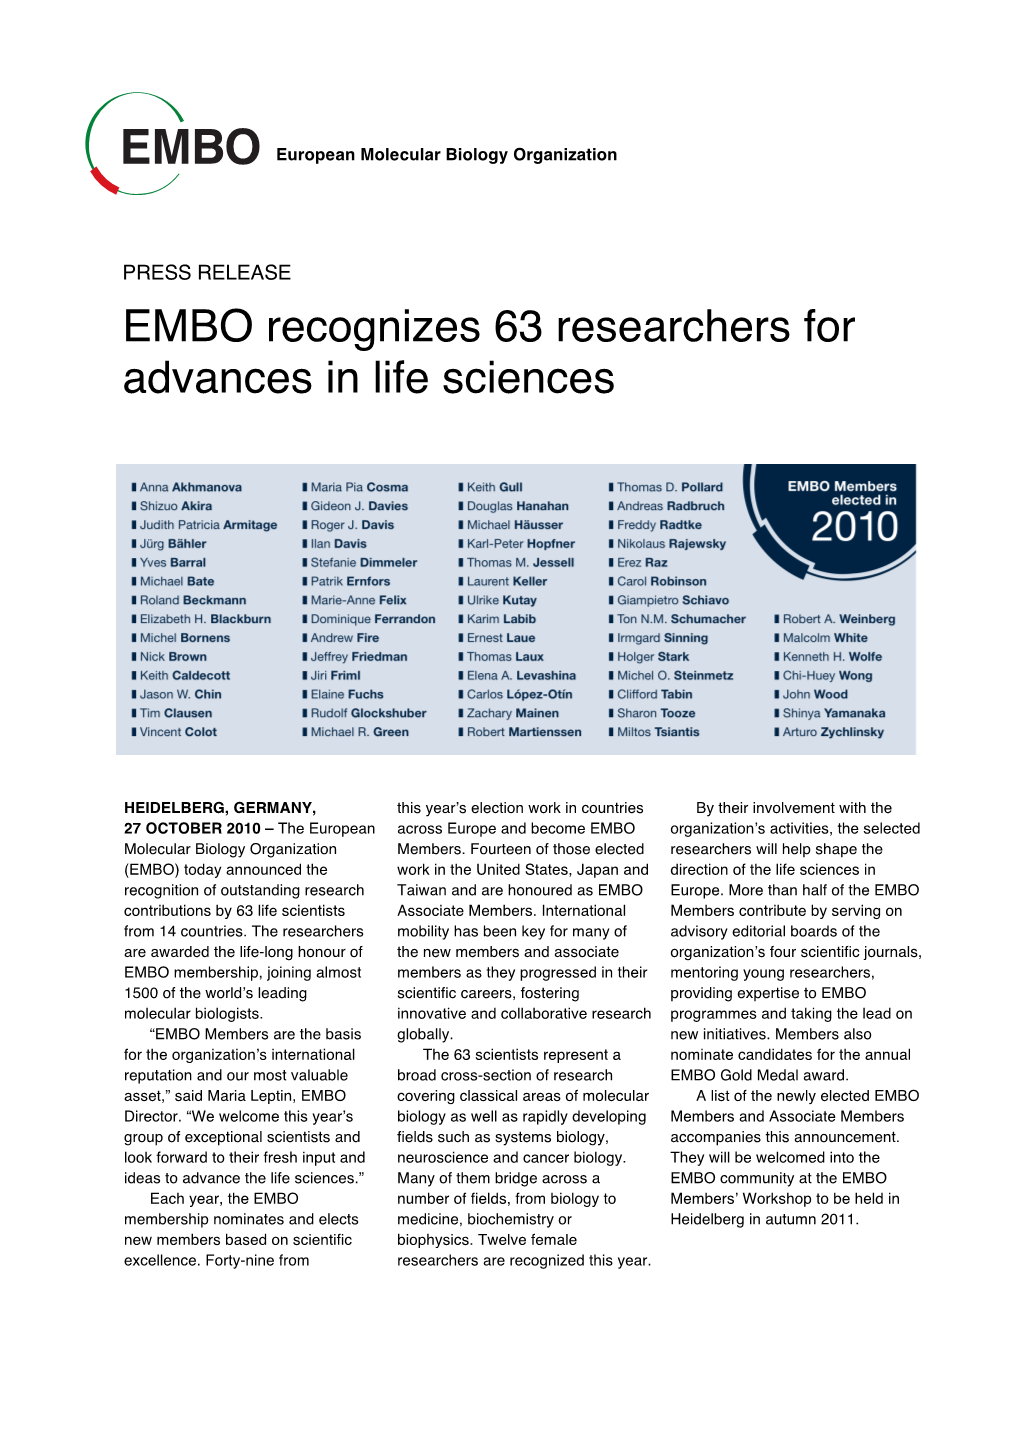 EMBO Recognizes 63 Researchers for Advances in Life Sciences